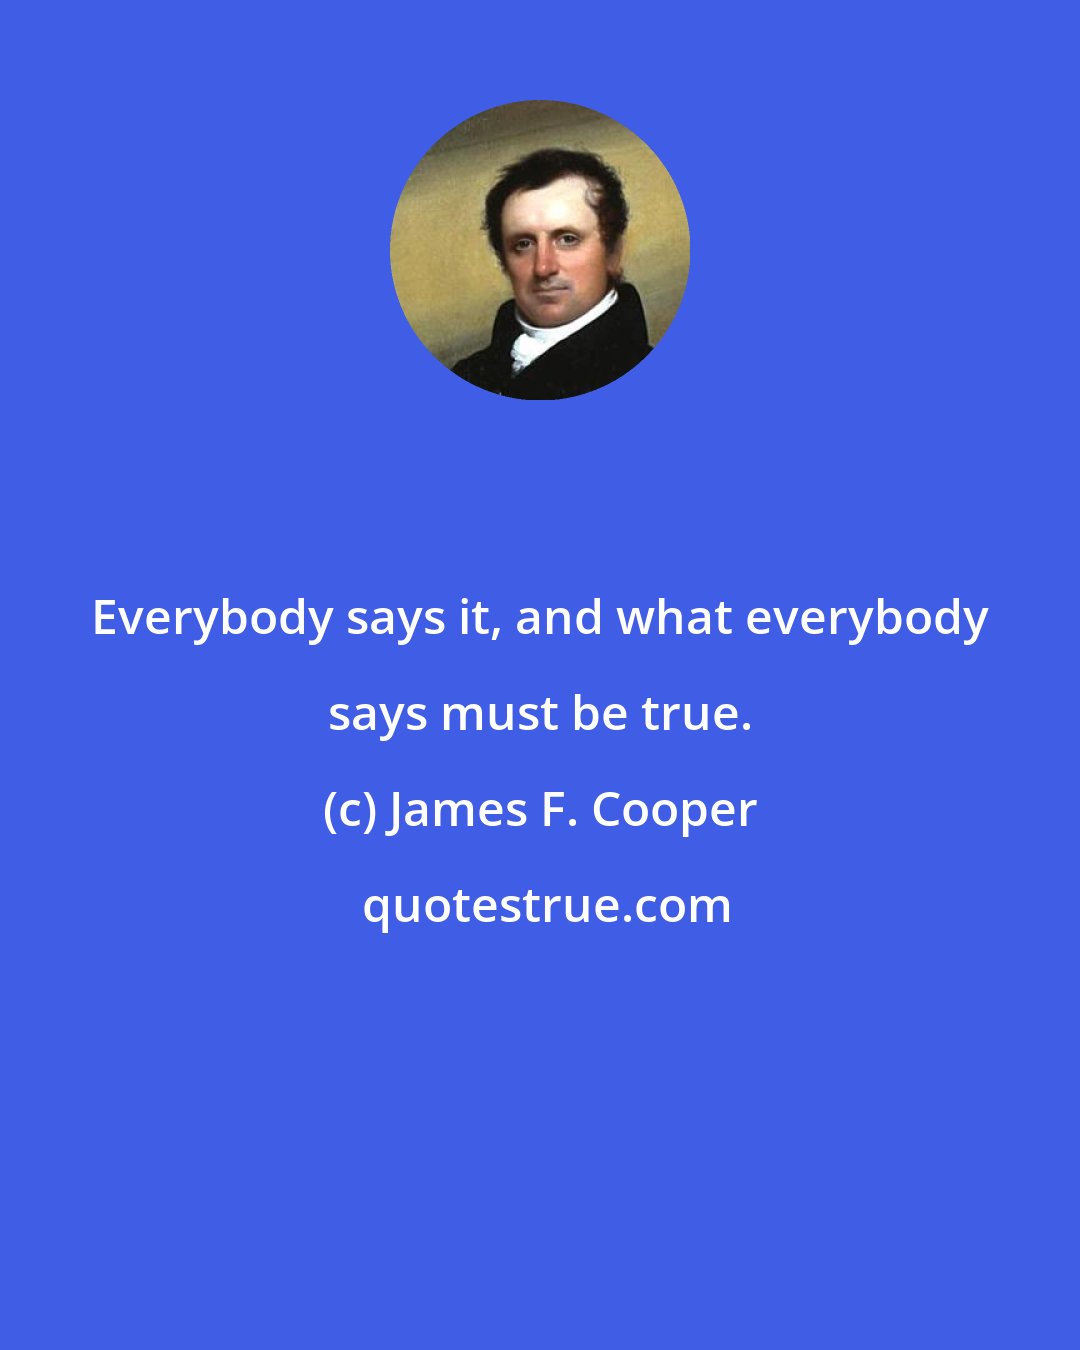 James F. Cooper: Everybody says it, and what everybody says must be true.